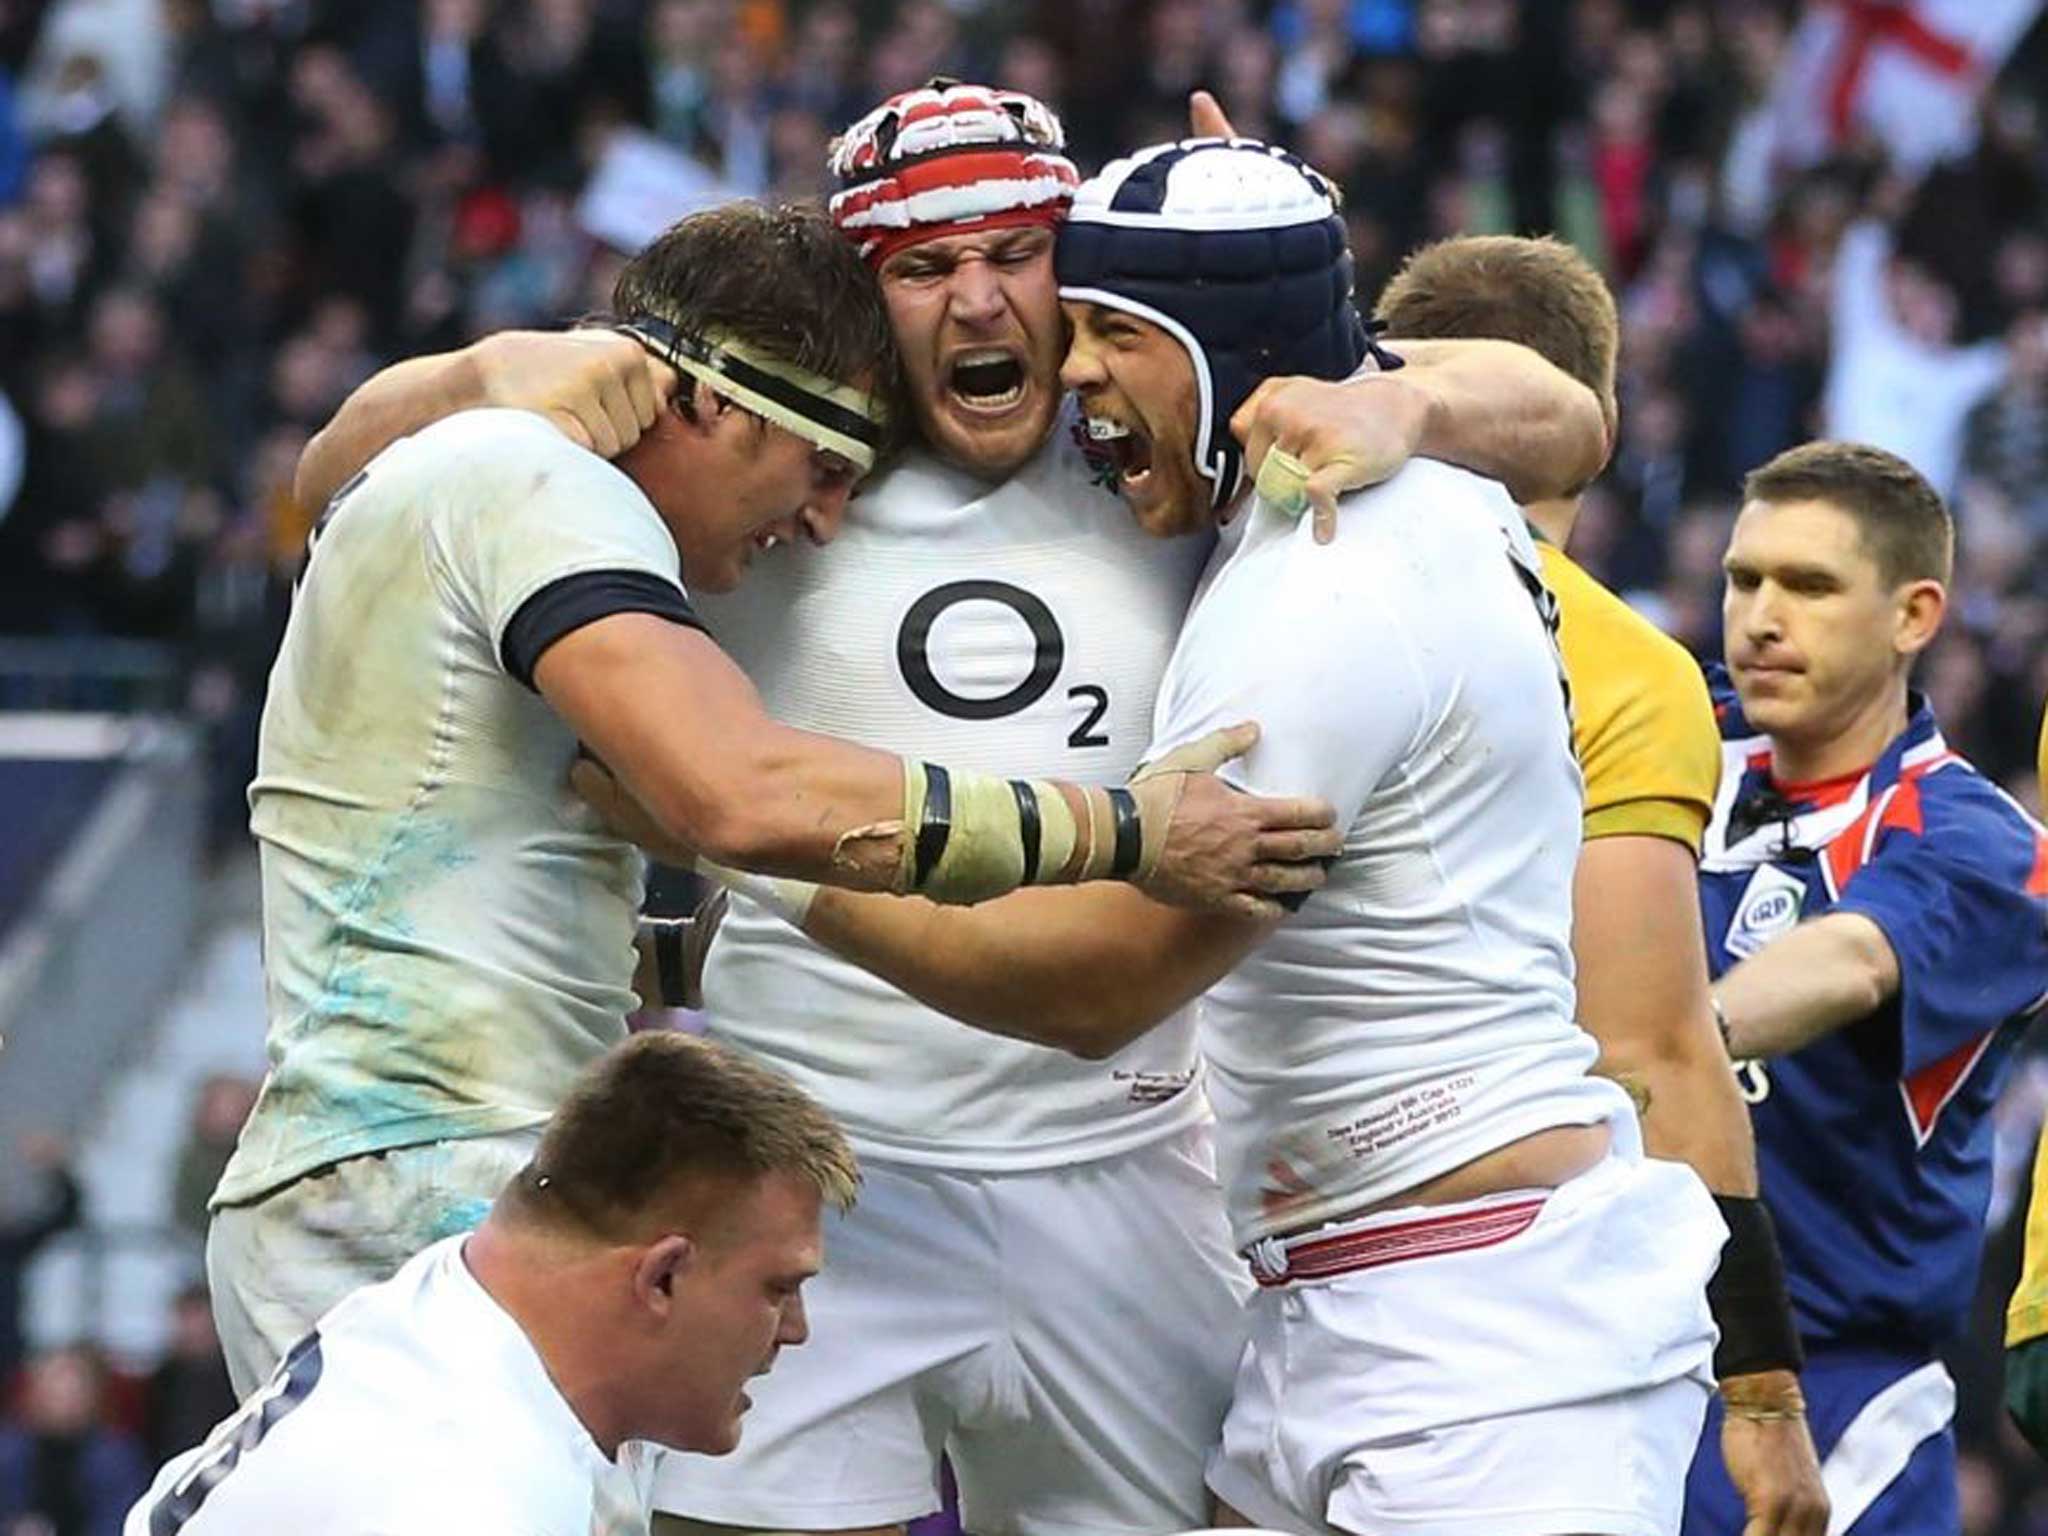 The England team celebrating after defeating Australia